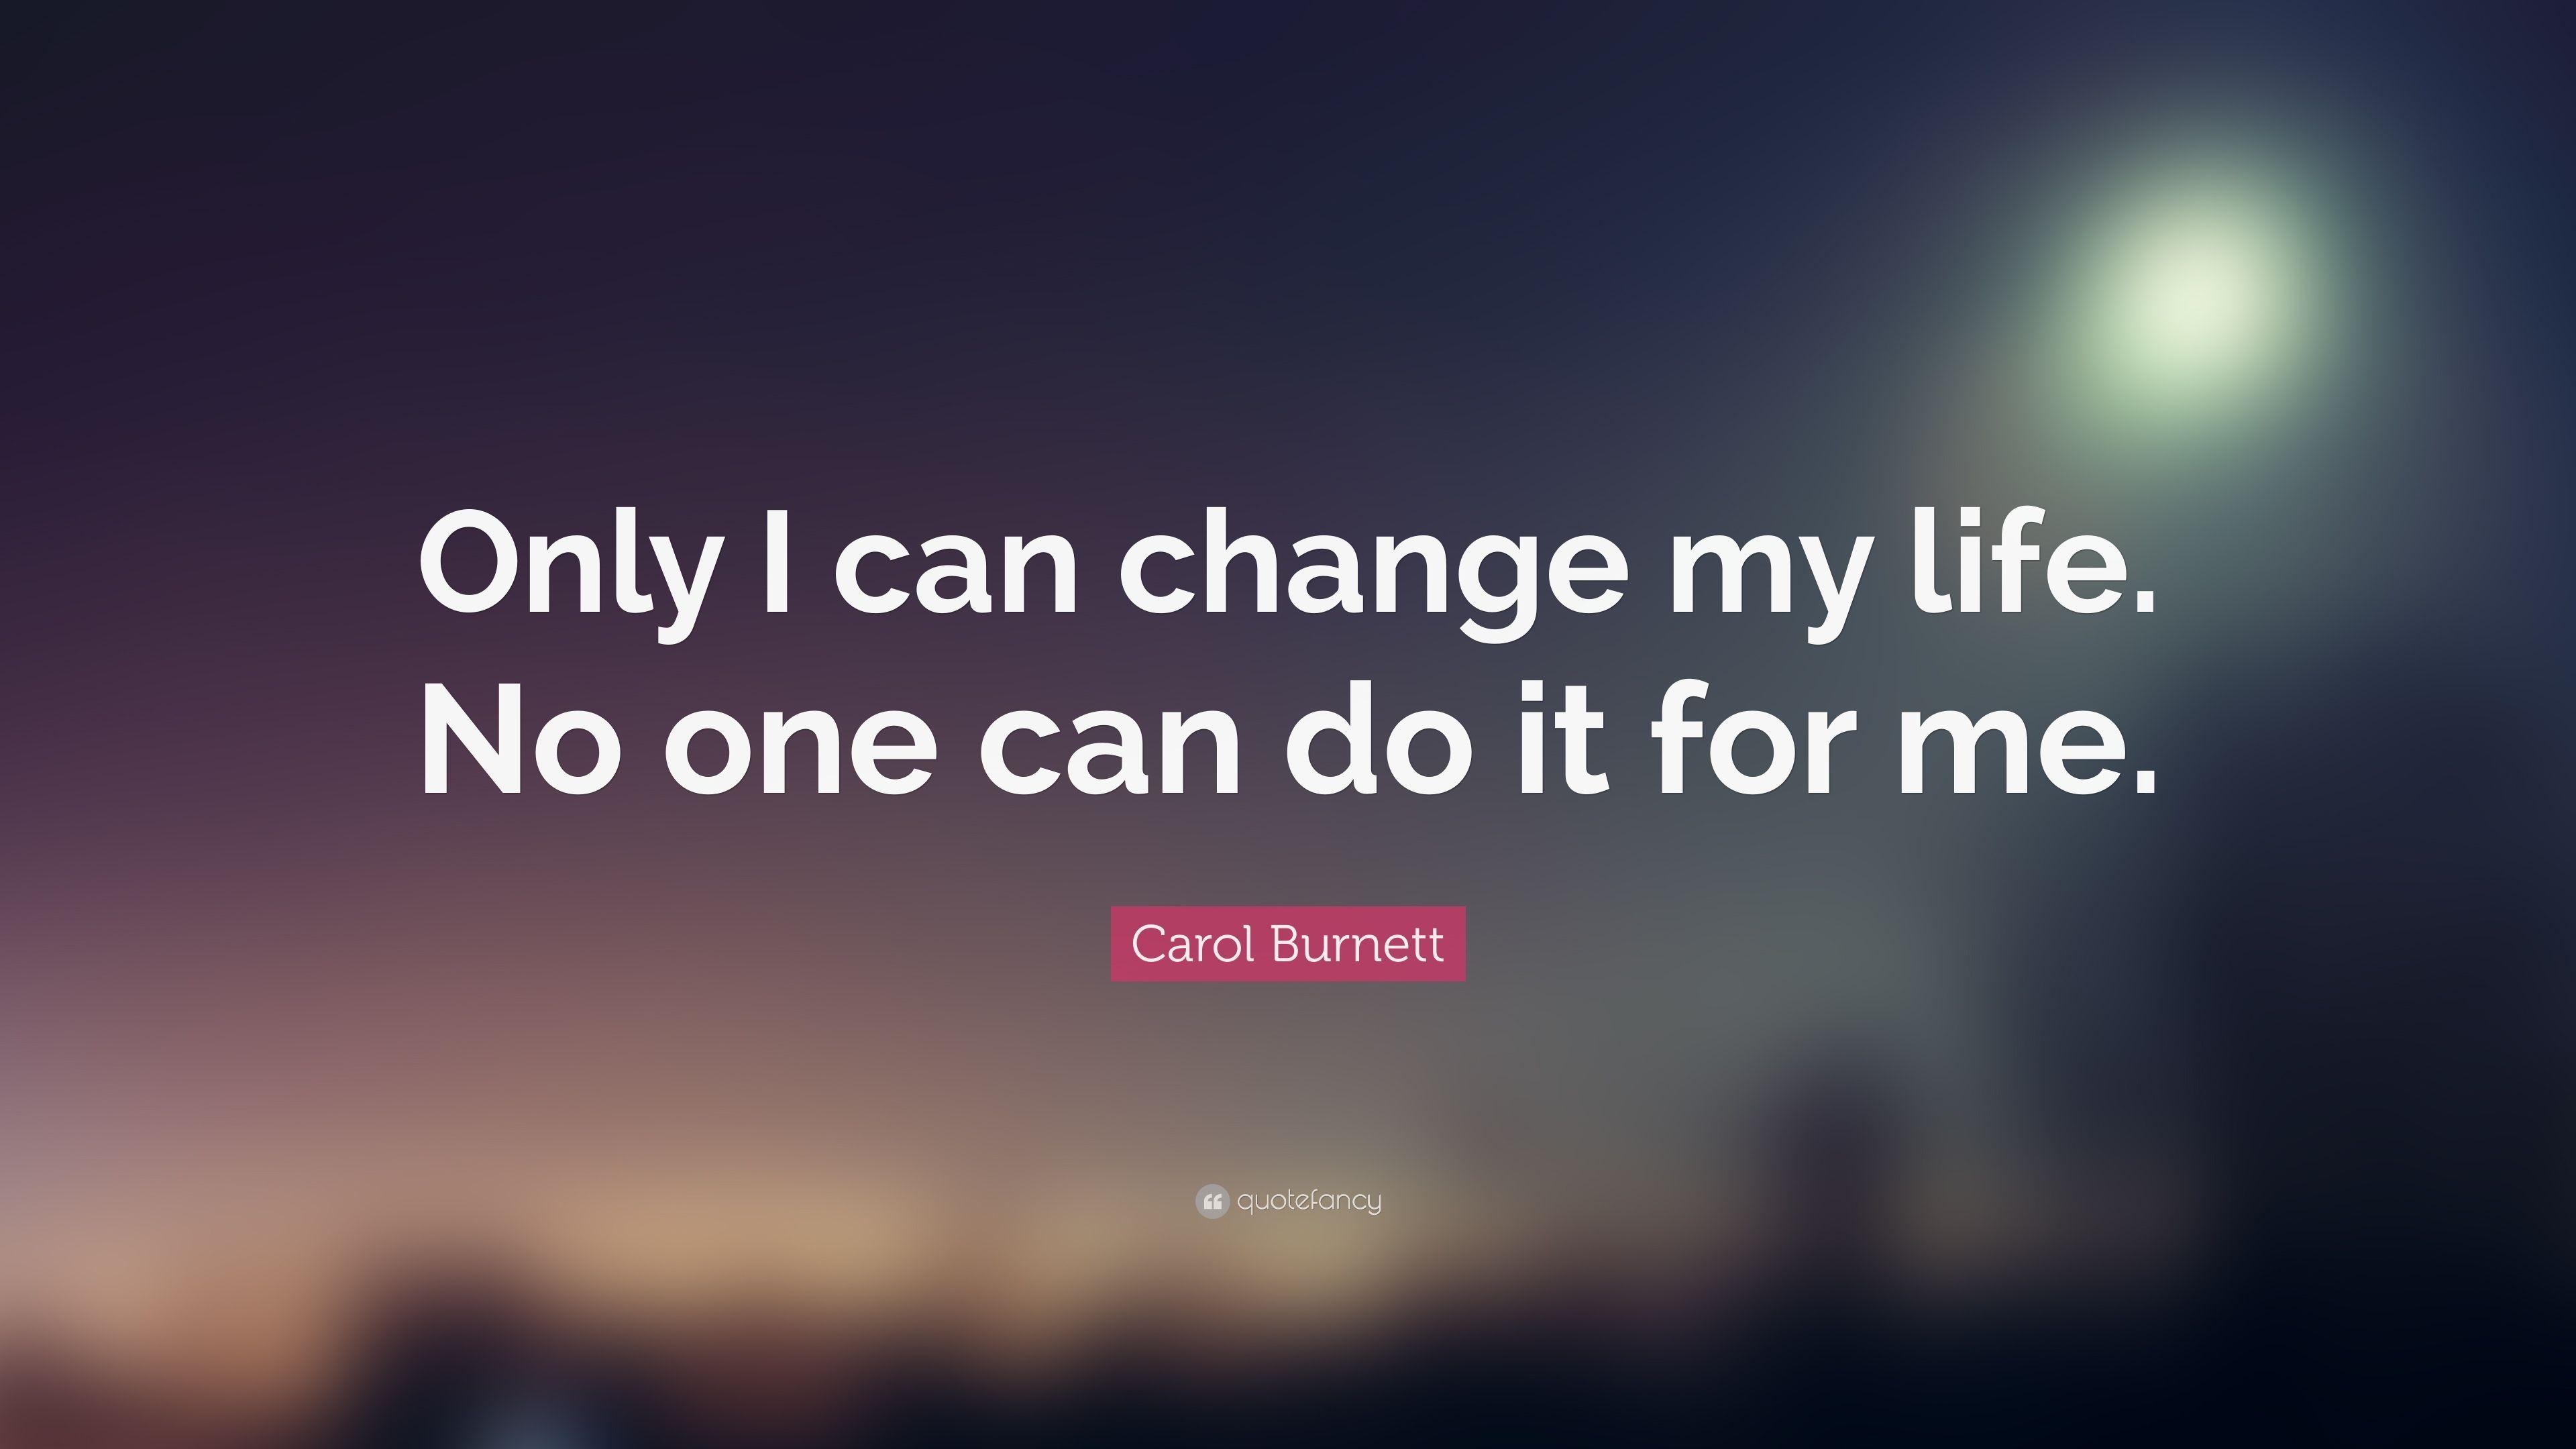 Carol Burnett Quote: “Only I can change my life. No one can do it